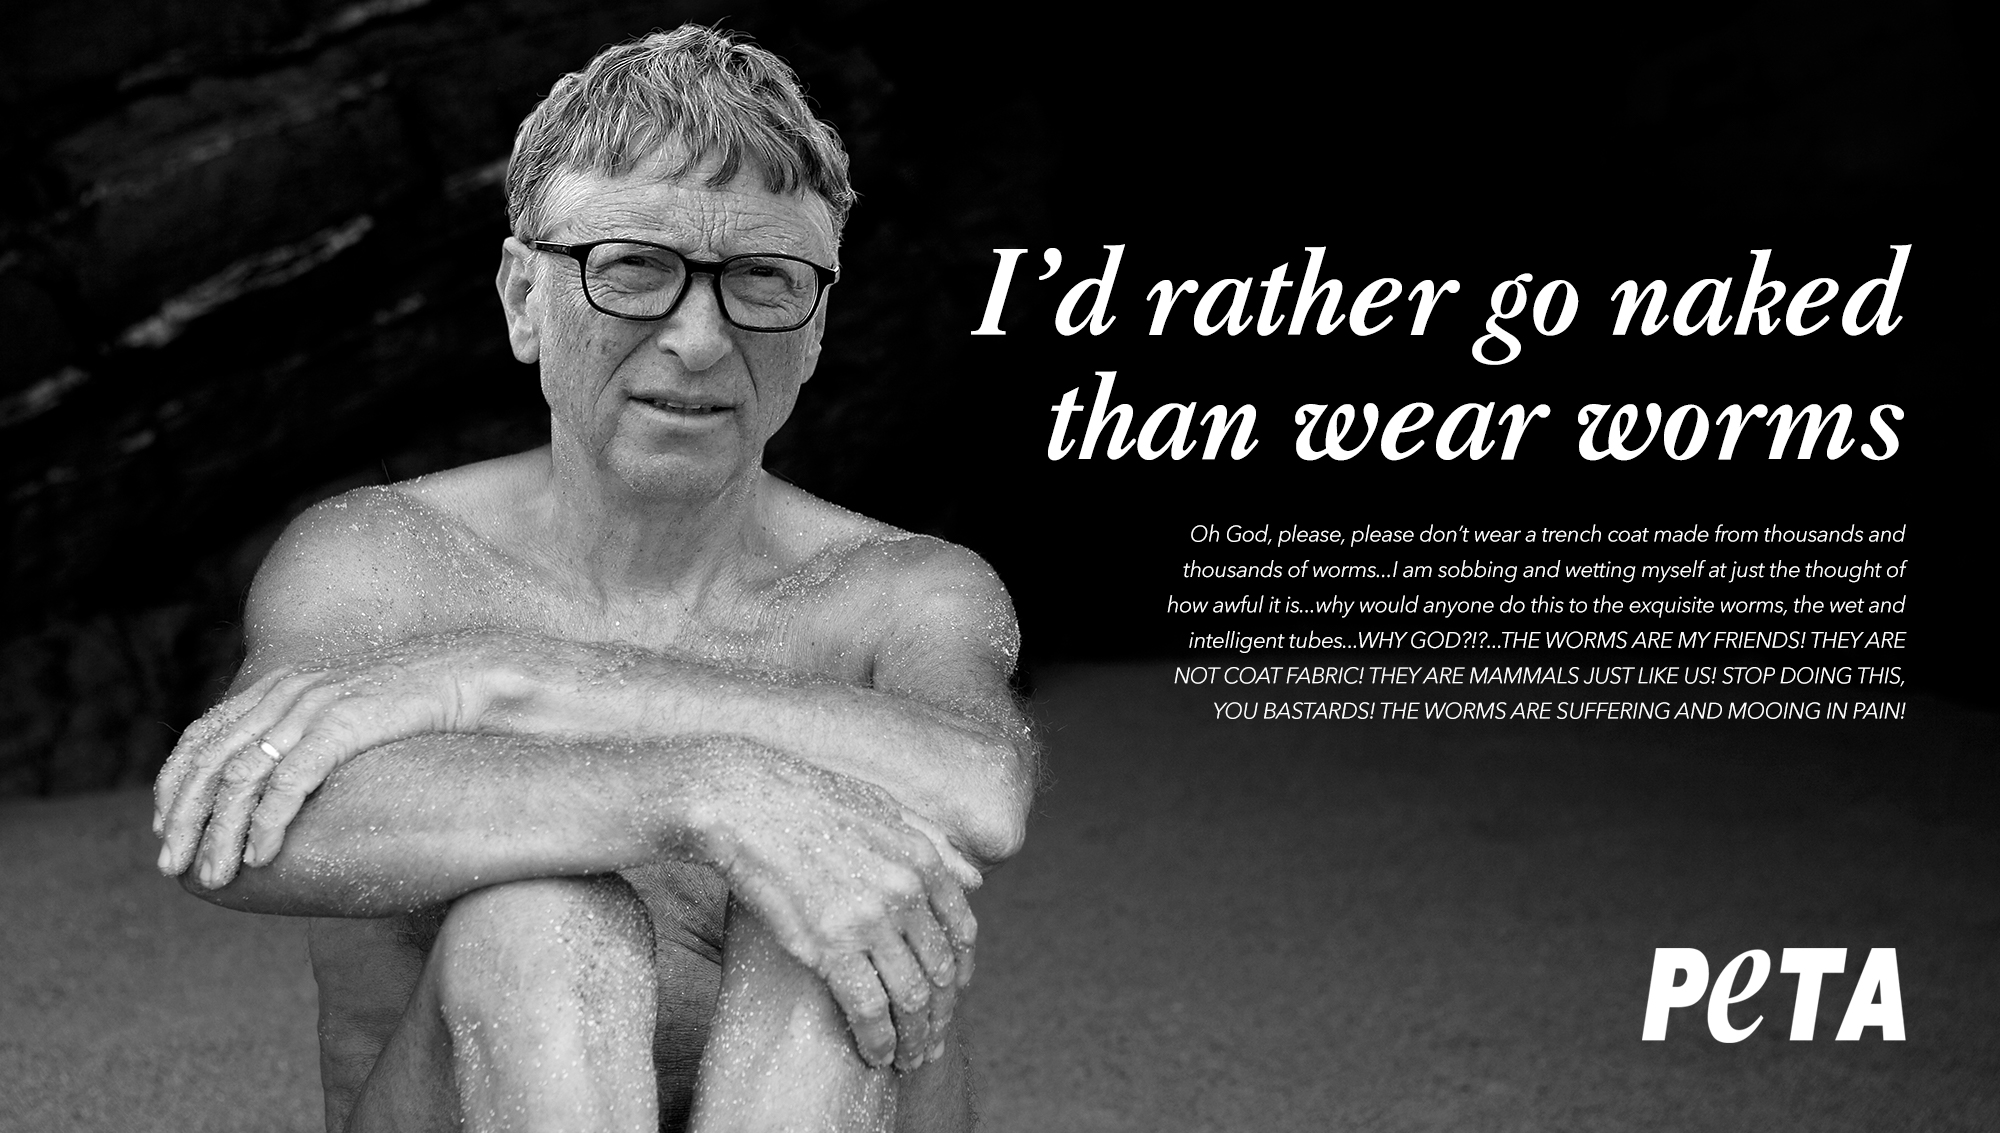 Bill Gates Porn Video - Champion Of Animal Rights: PETA's New Ad Campaign Features A Naked Bill  Gates Begging People Not To Wear A Trench Coat Made Out Of Worms - ClickHole